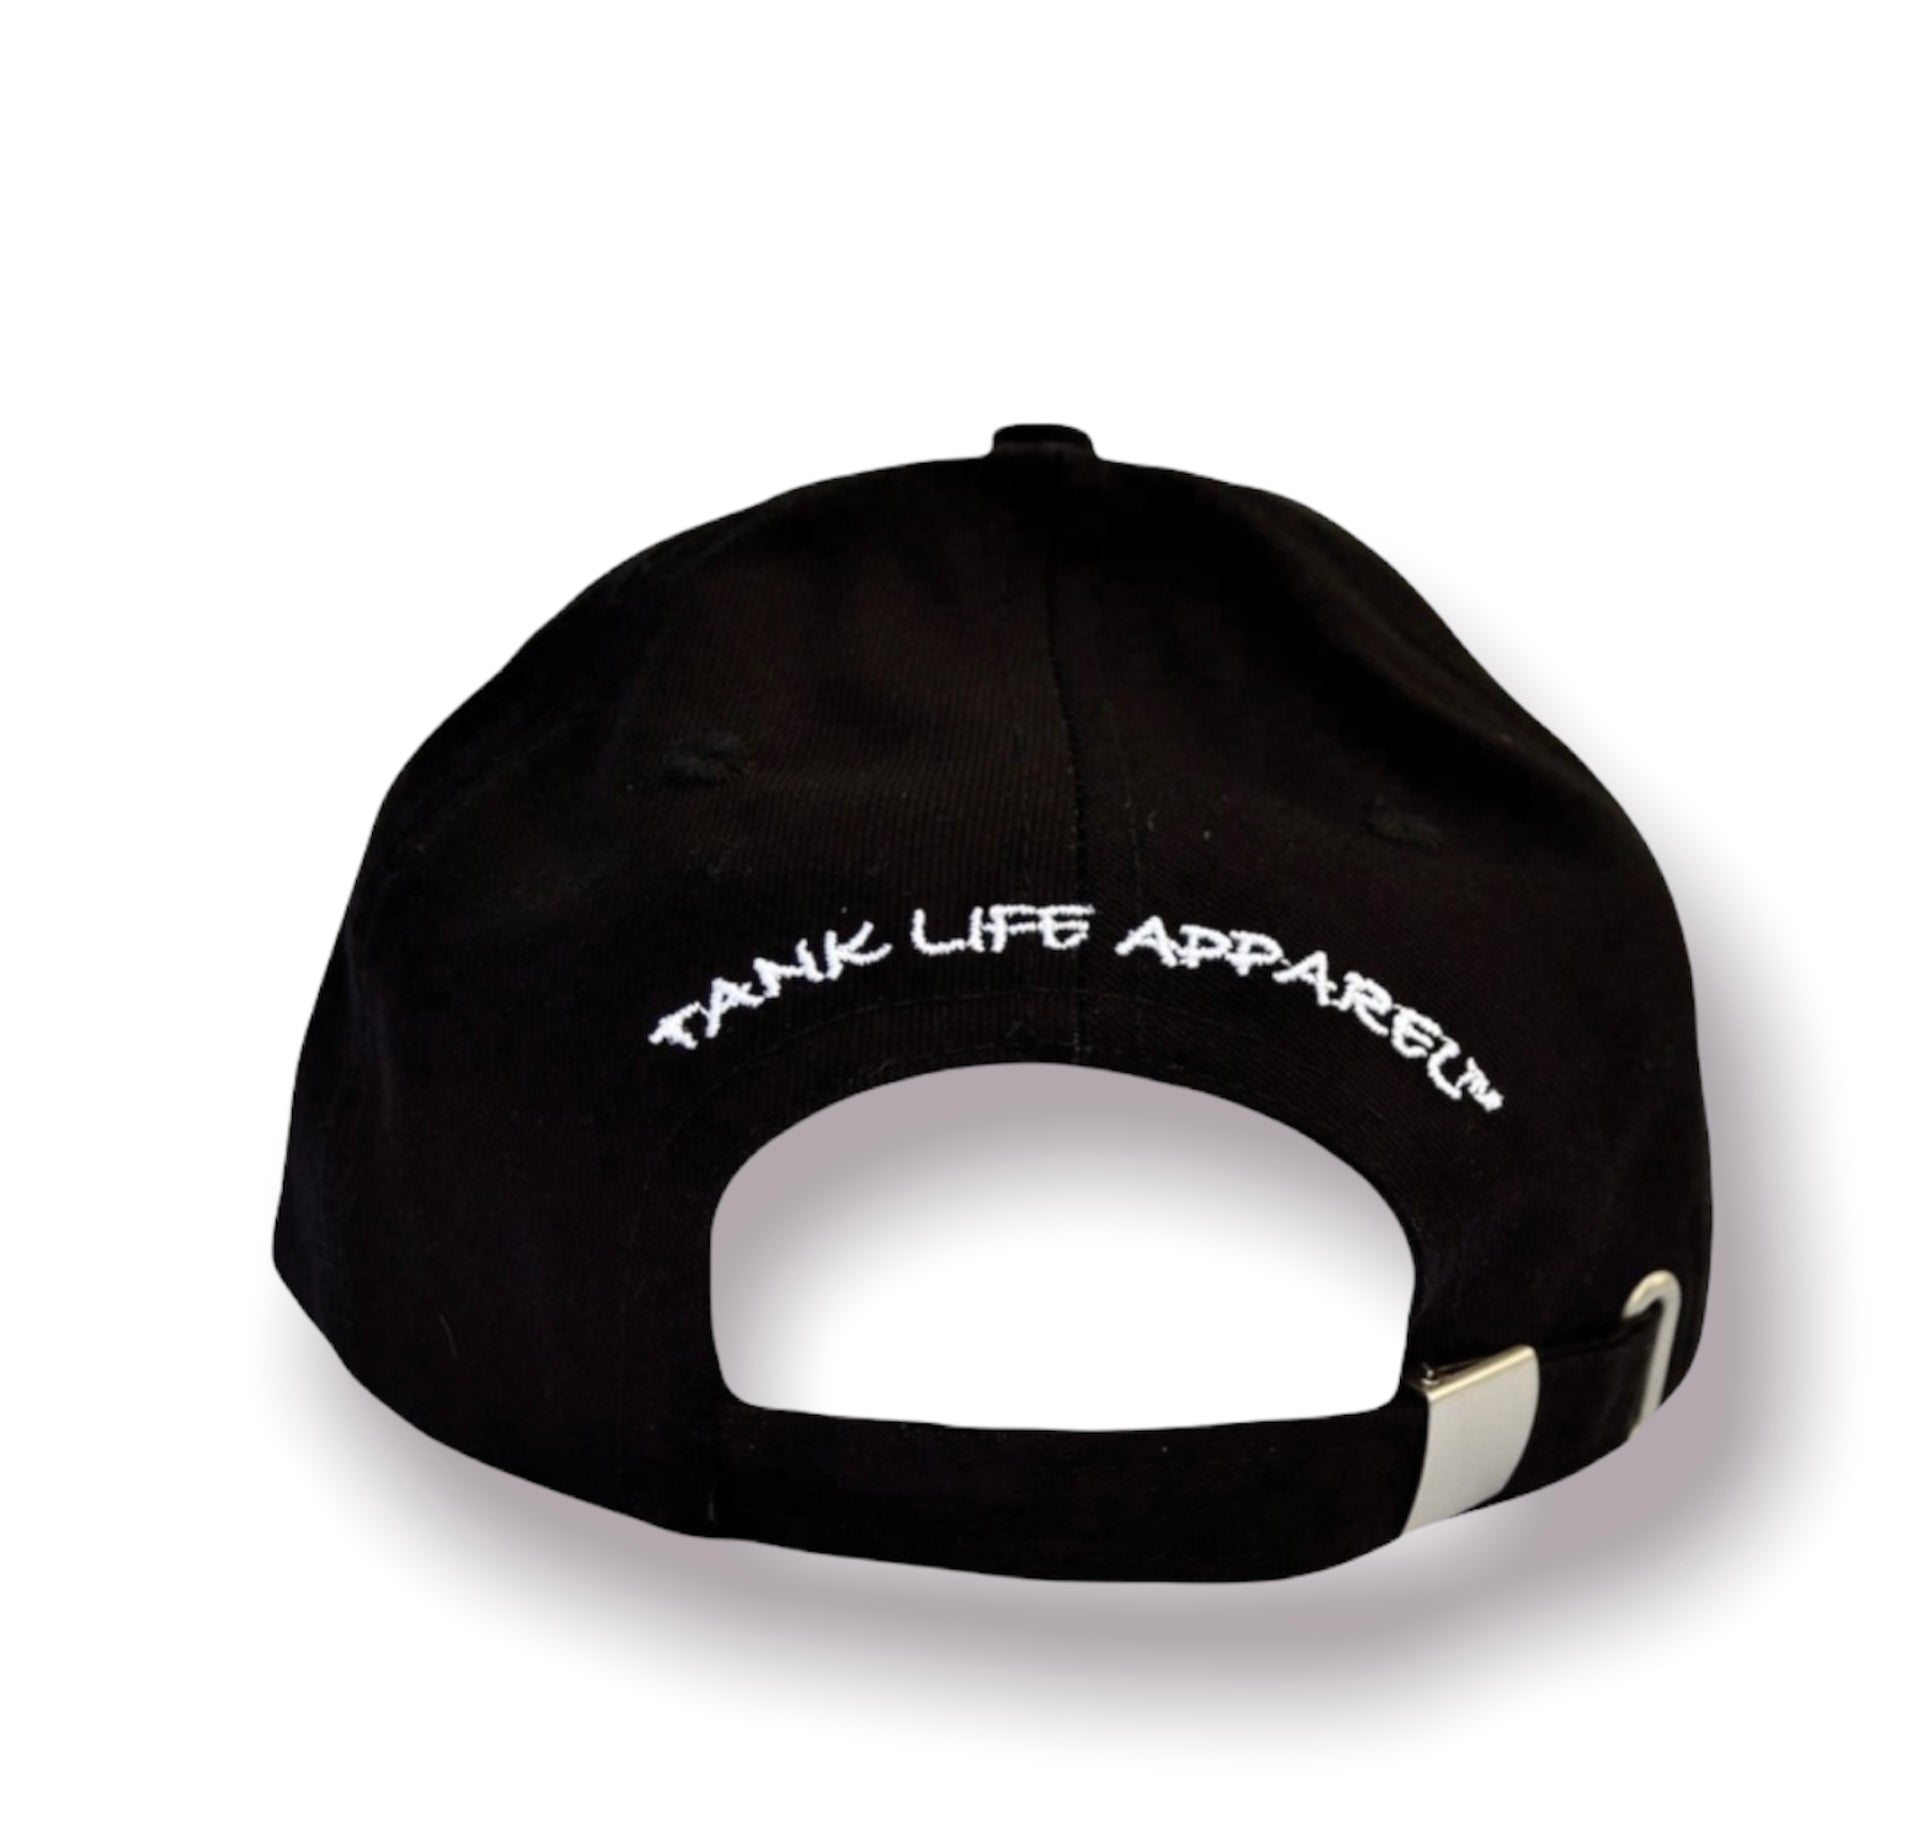 The Tank Life Apparel aquarium logo embroidered patch on an adjustable black hat.  Fish tank hat.